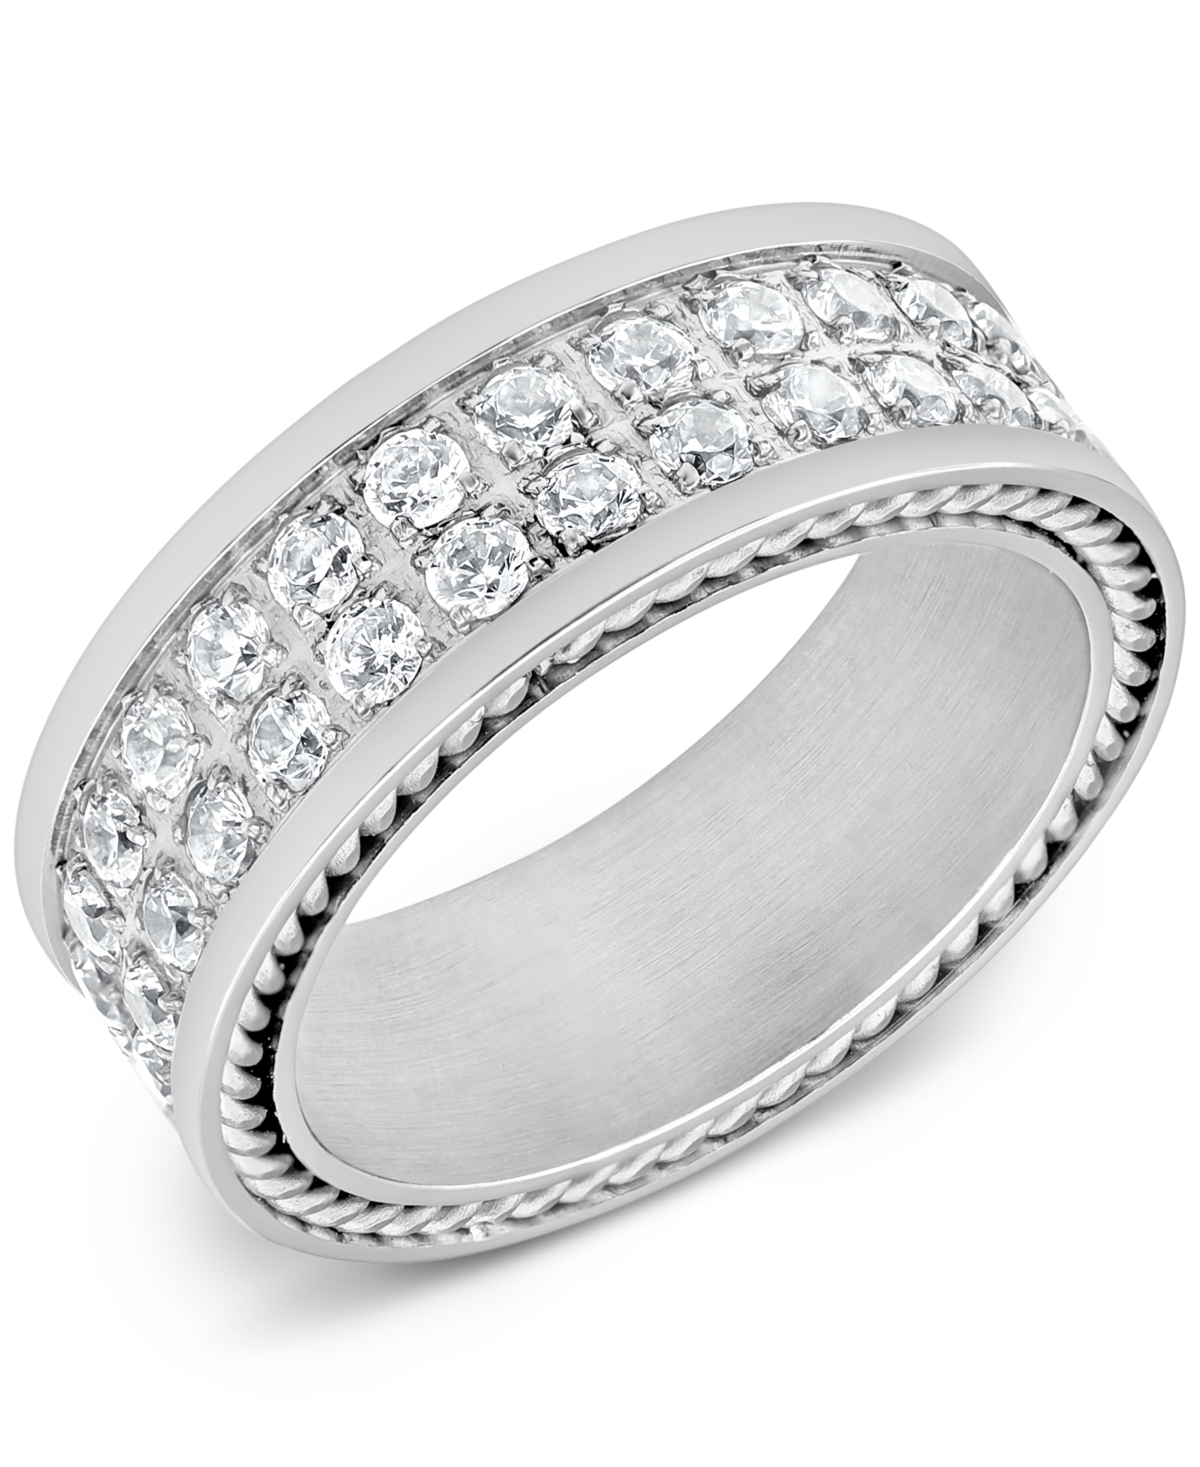 Men's Cubic Zirconia Band in Stainless Steel - Stainless Steel